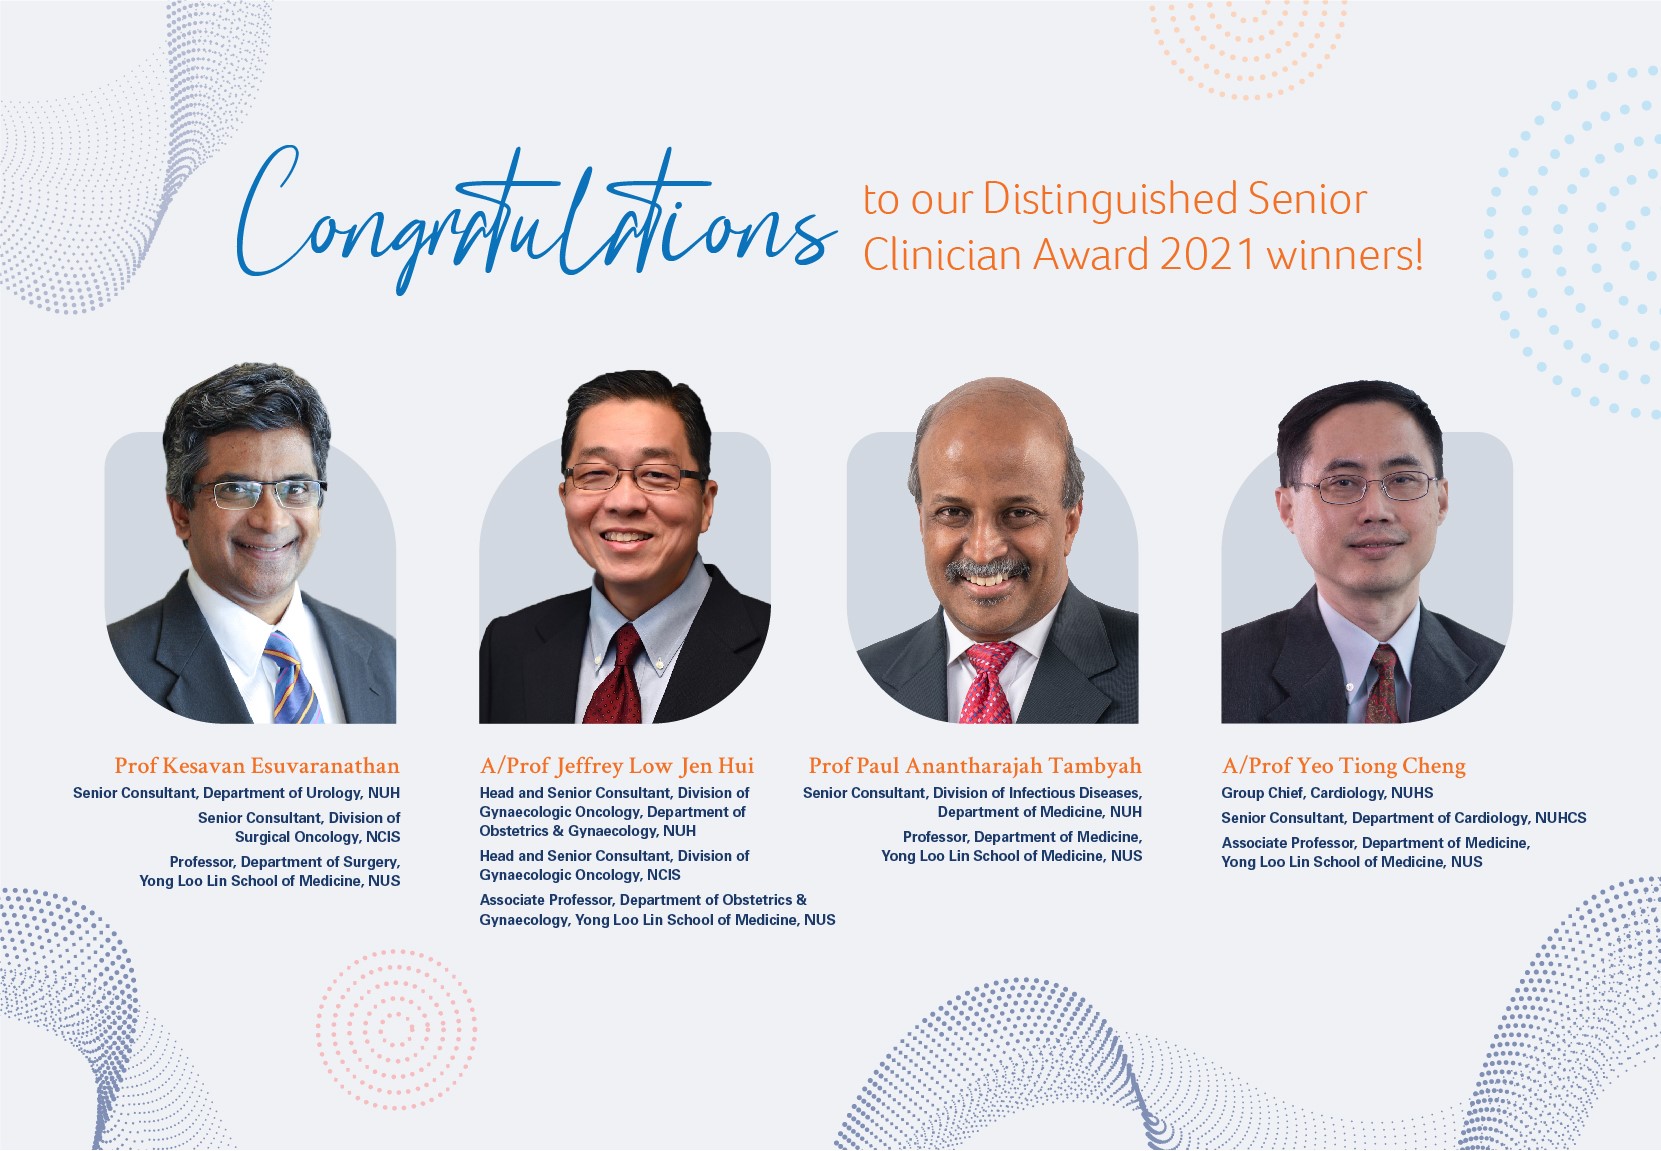 Congratulations to Our 2021 Distinguished Senior Clinician Award winners